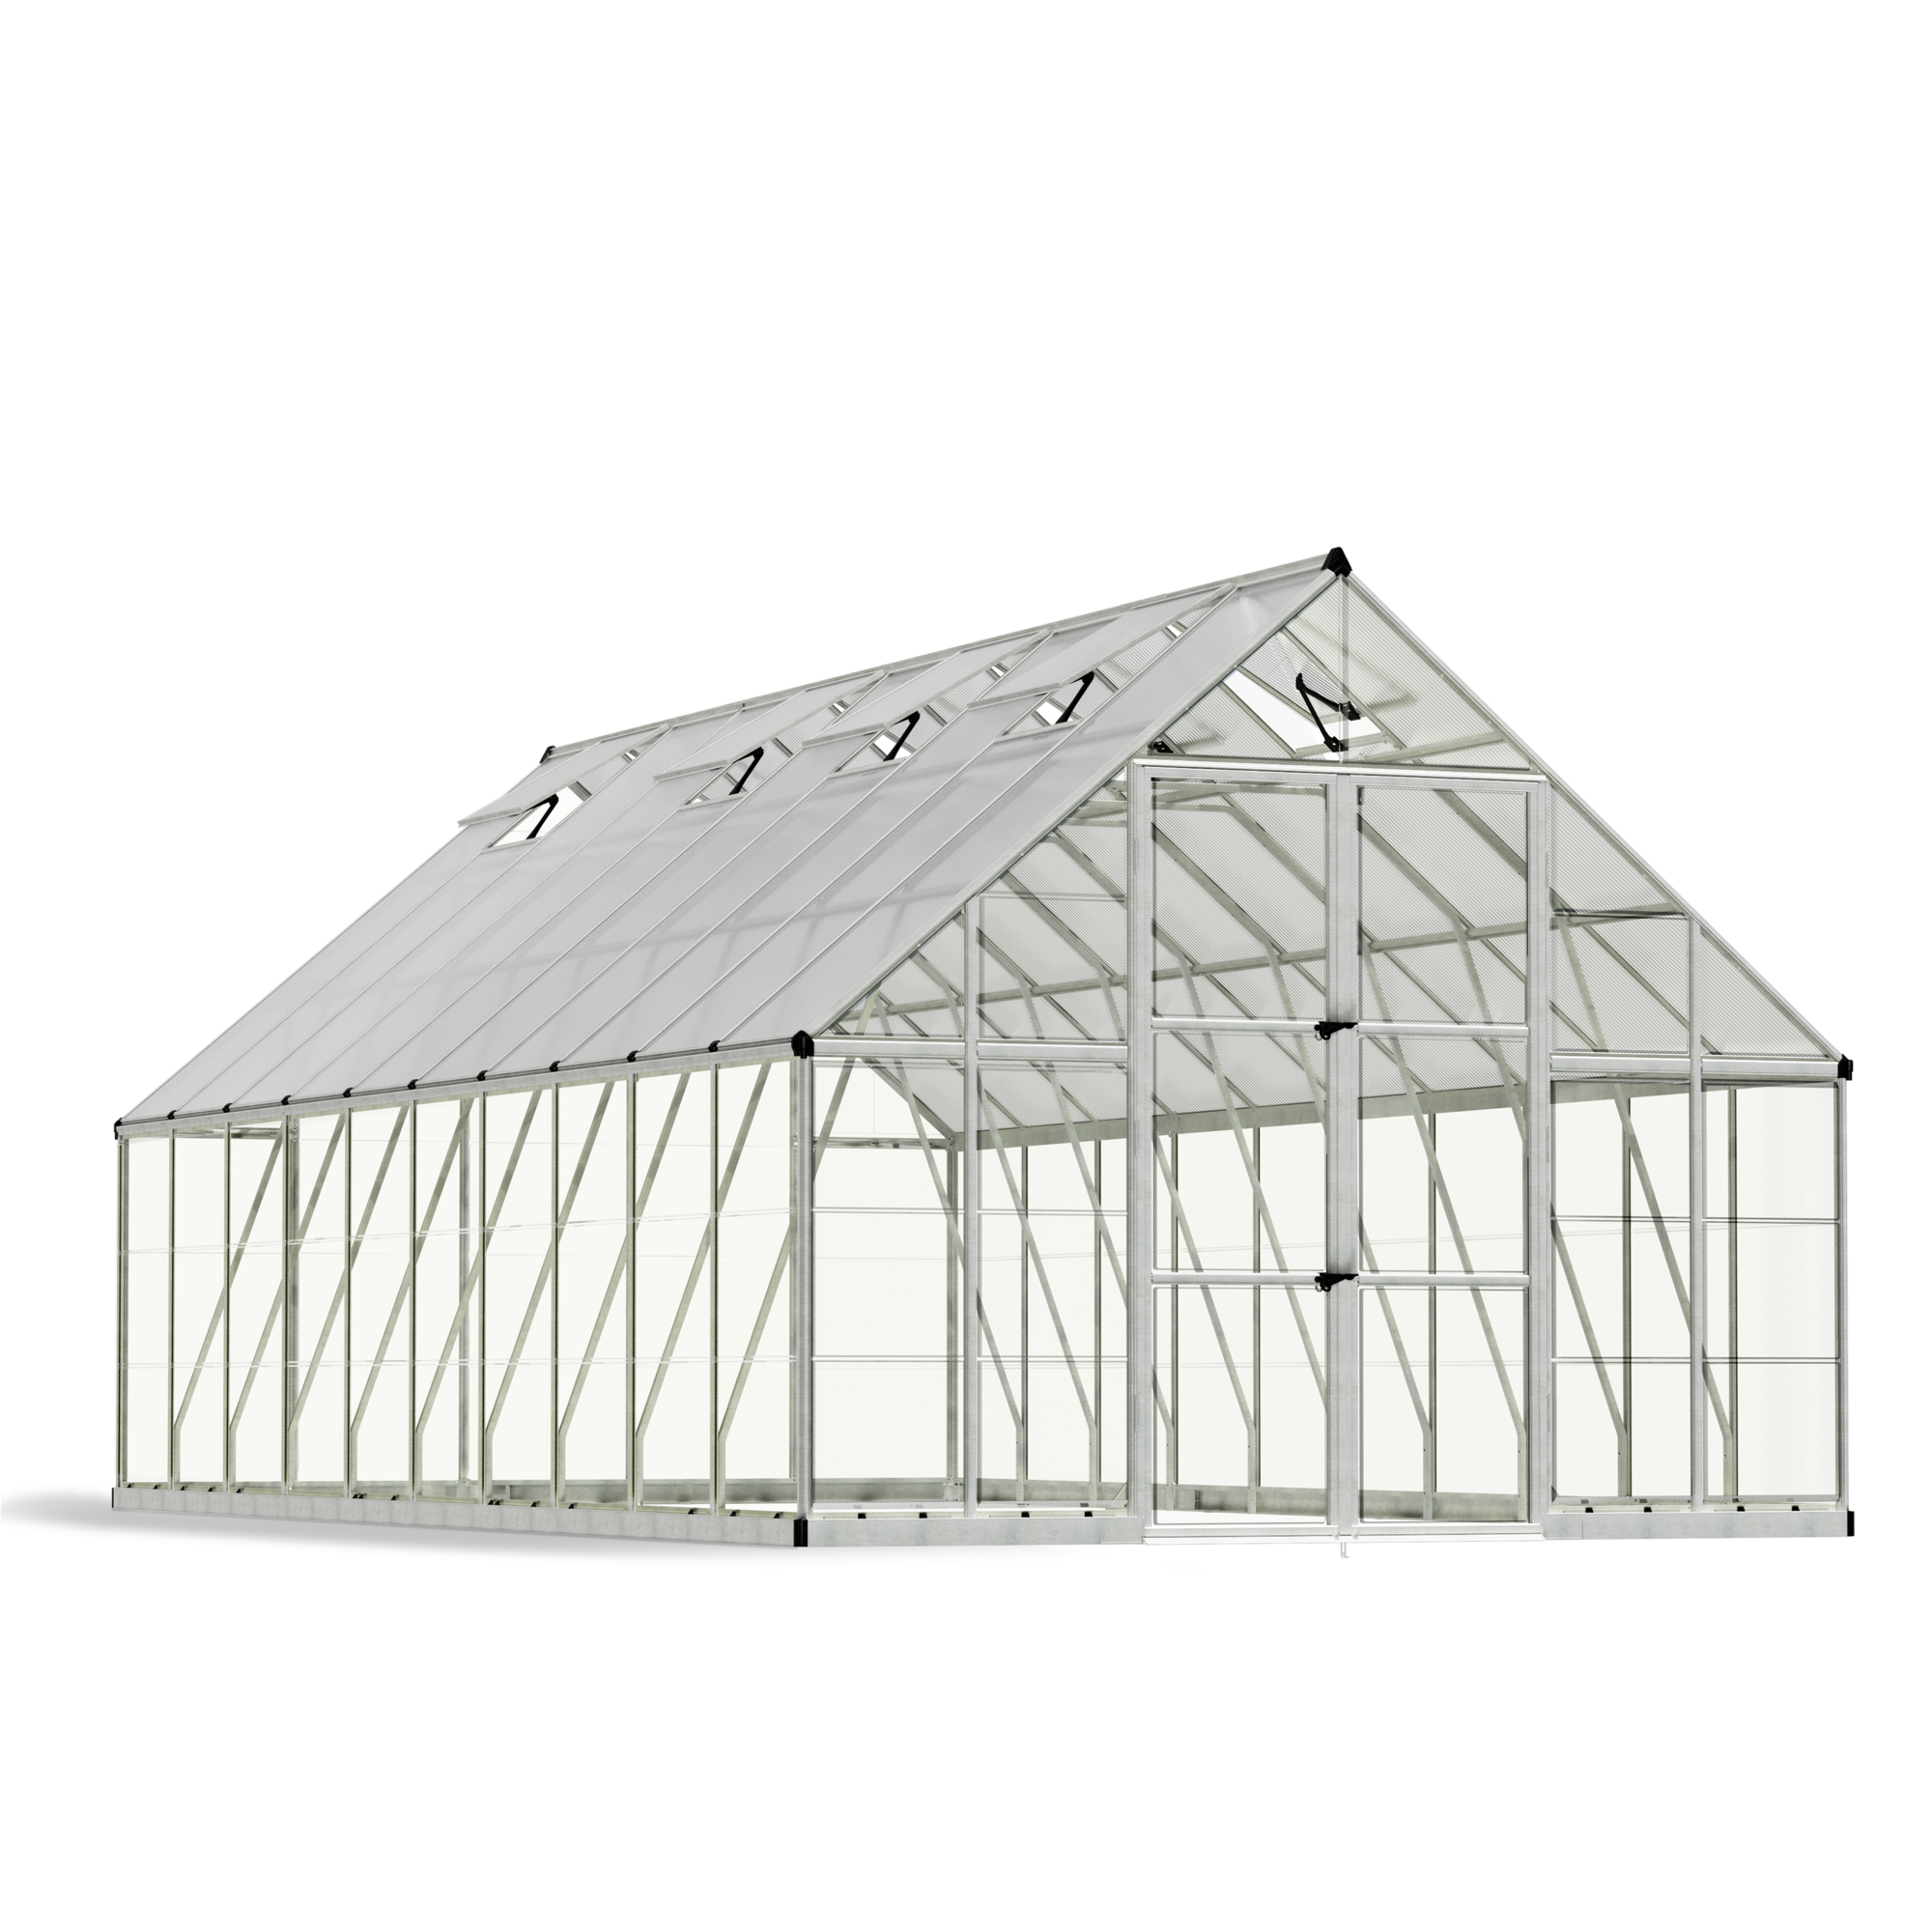 Poly-Tex Inc., Balance 10ft. x 20ft. Greenhouse - Silver, Length 237.8 in, Width 119.7 in, Center Height 101.2 in, Model 707012